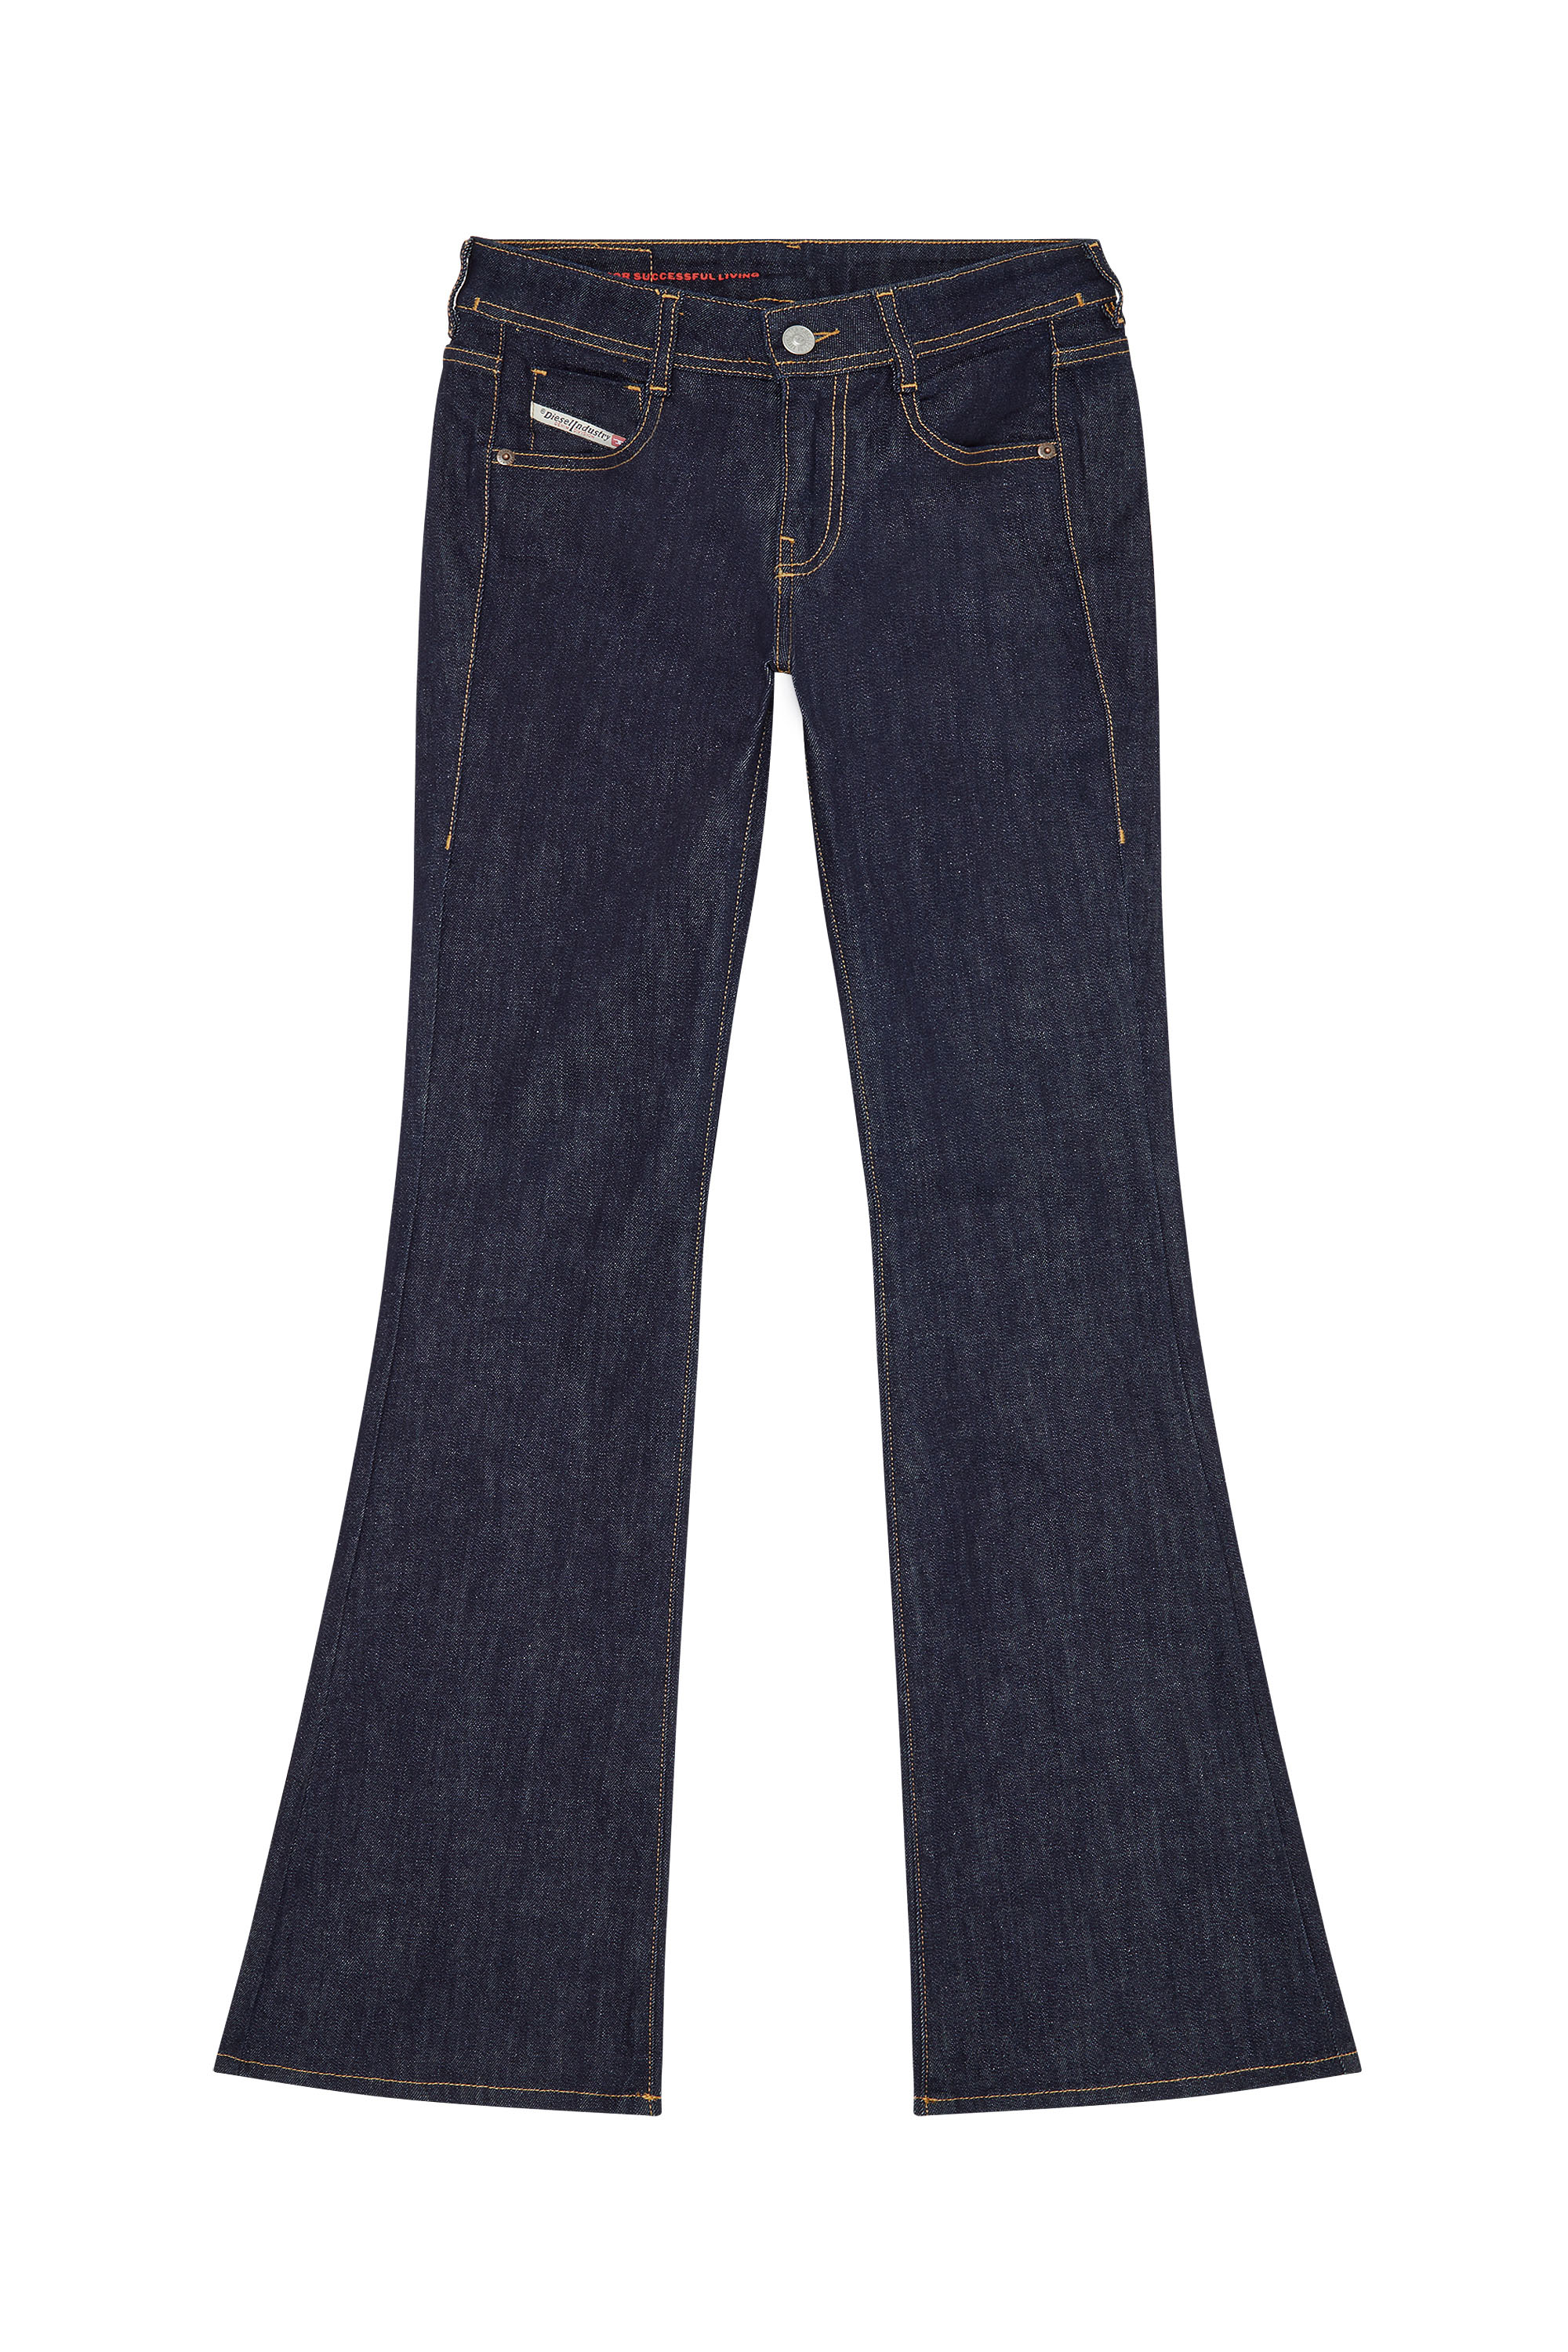 Bootcut and Flare Jeans 1969 D-Ebbey Z9B89, Dunkelblau - Jeans